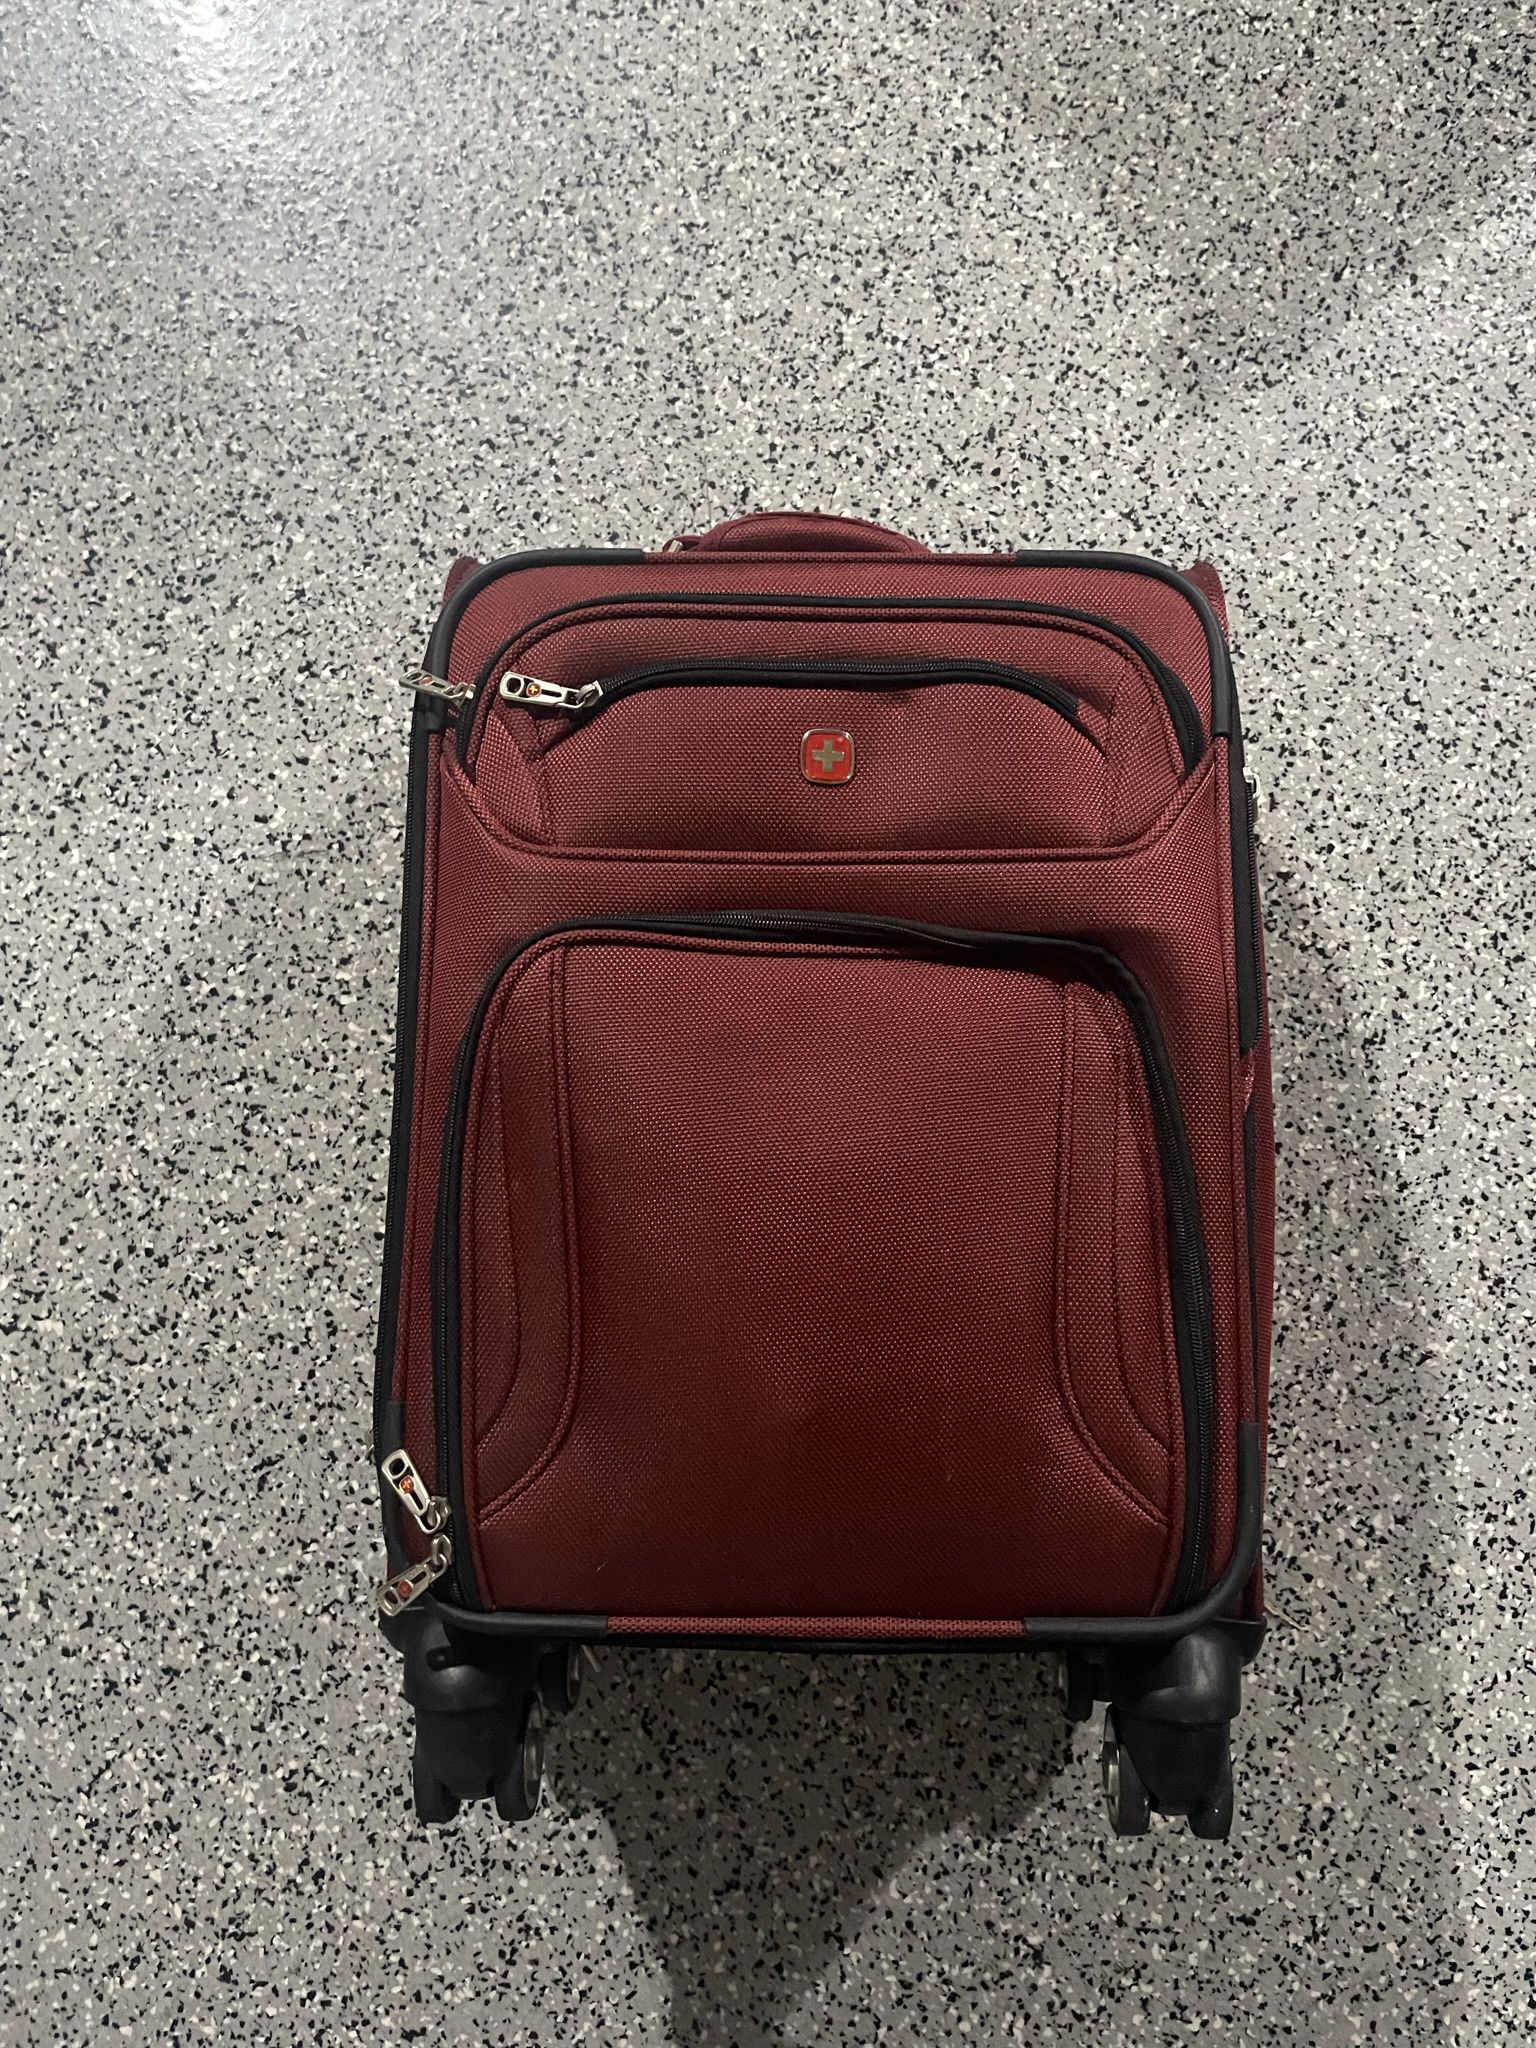 Swiss Gear Wenger Expandable Laptop Carry On Luggage